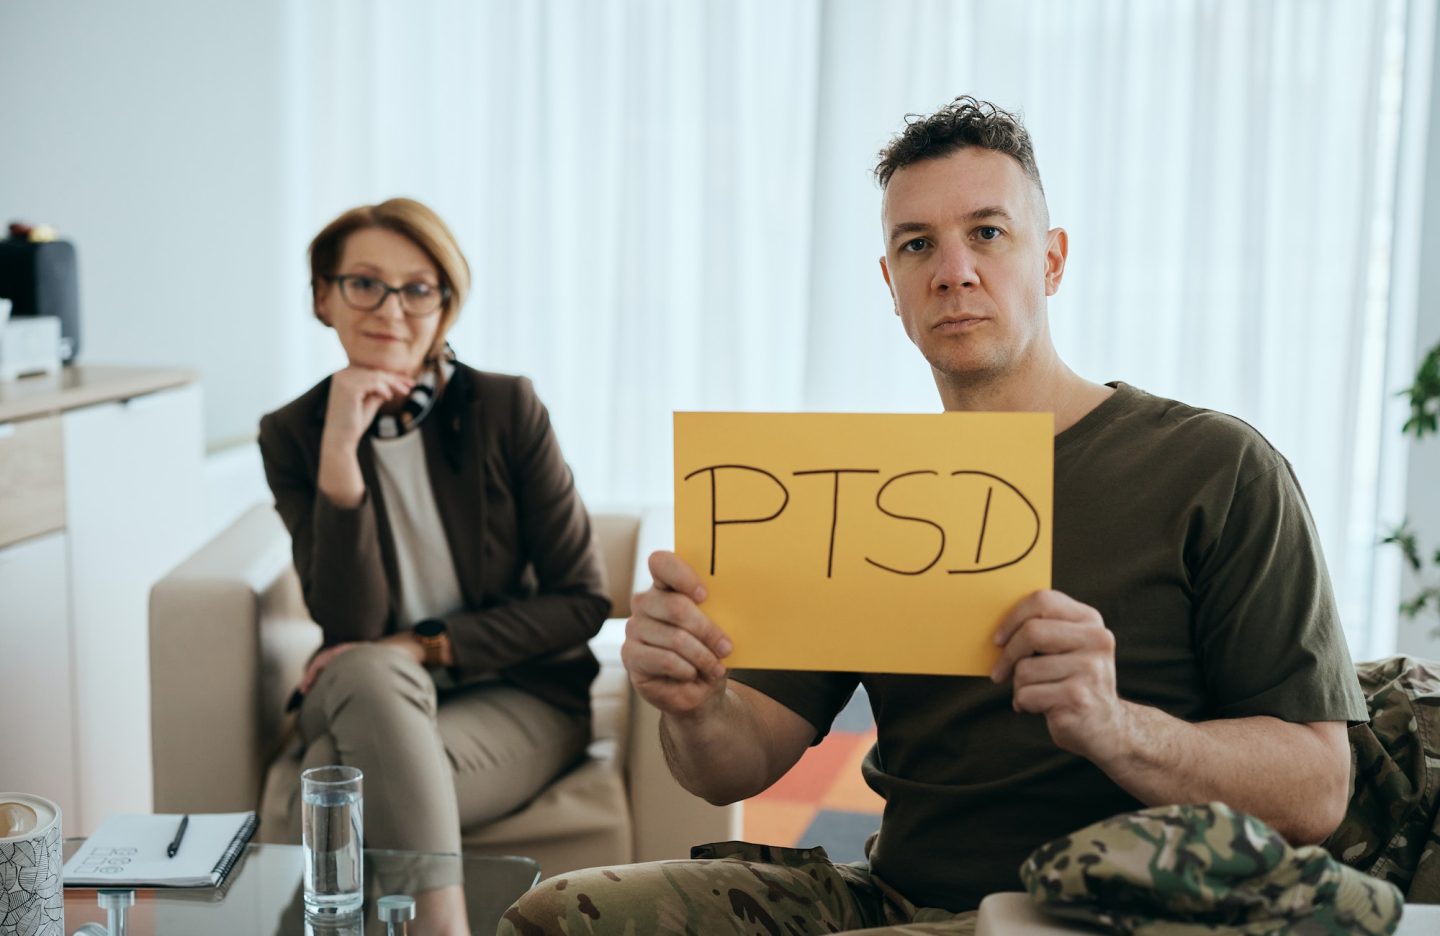 Soldier holding placard with PTSD message during counseling with psychiatrist and looking at camera.